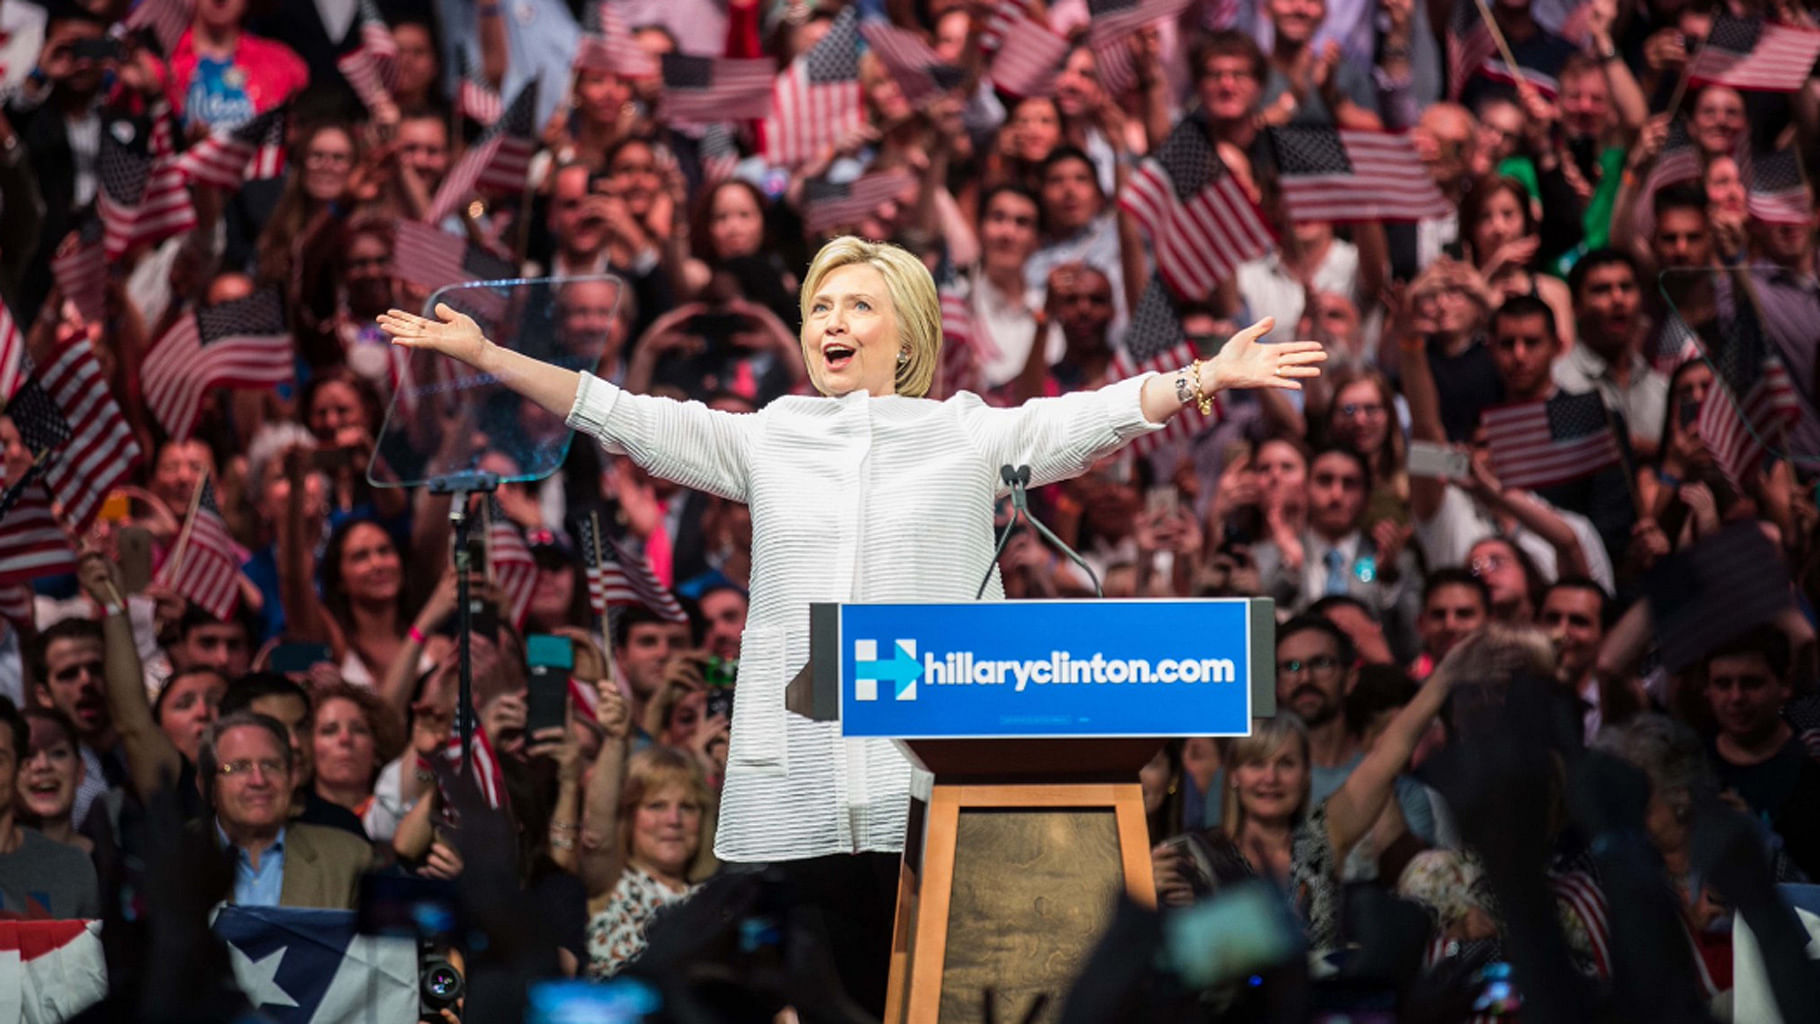 Hillary Clinton declared herself the Democratic Party nominee for US president on Tuesday. (Photo Courtesy:<a href="https://twitter.com/HillaryClinton"> Twitter.com/HillaryClinton</a>)